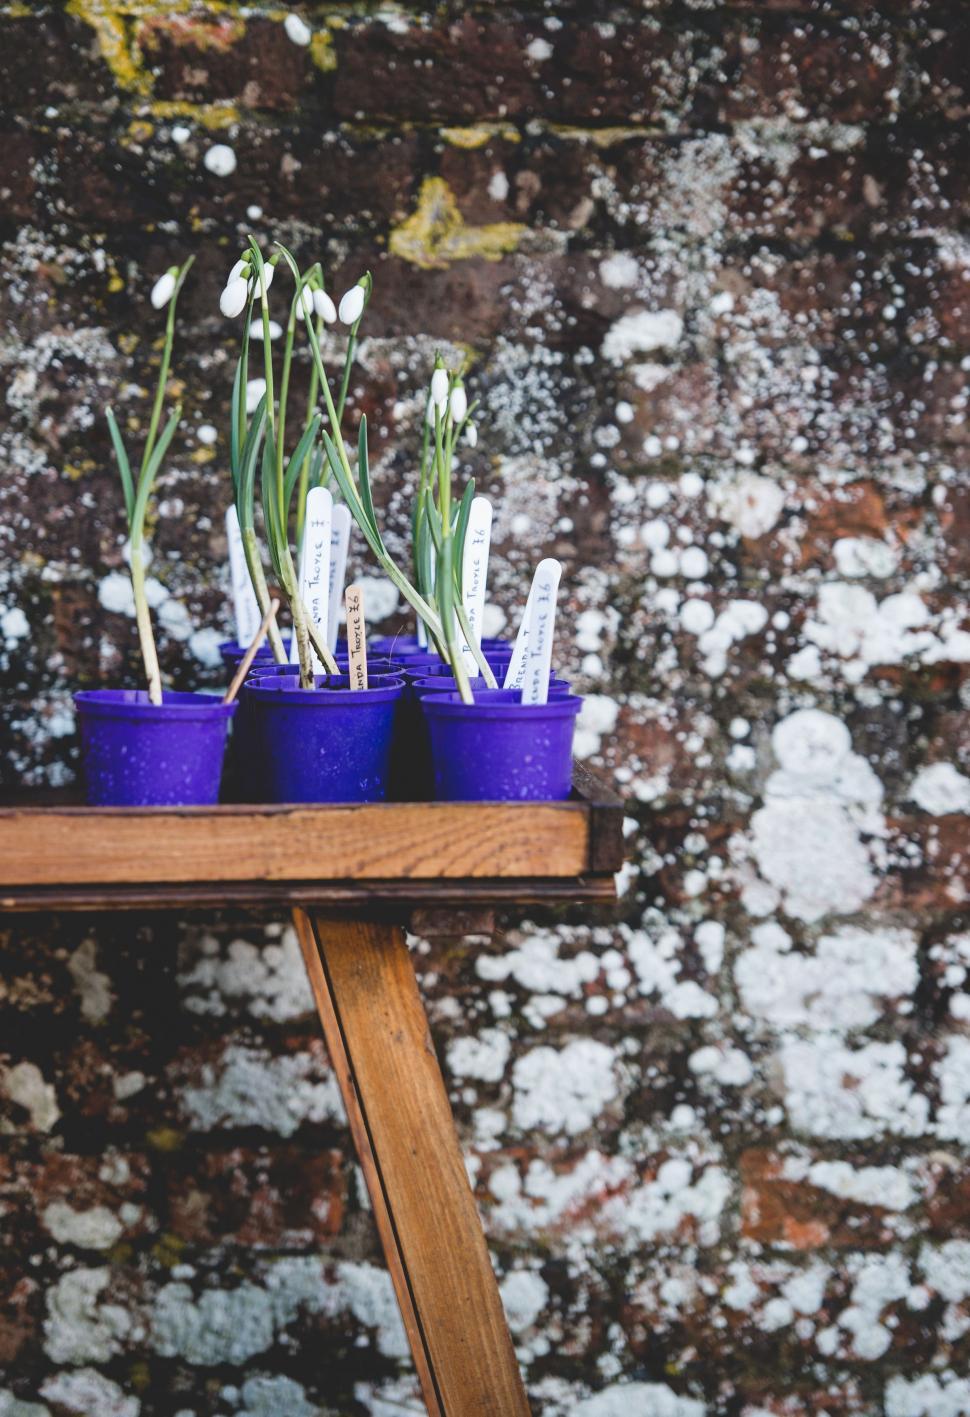 Free Image of Wooden Table With Purple Cups of Flowers 